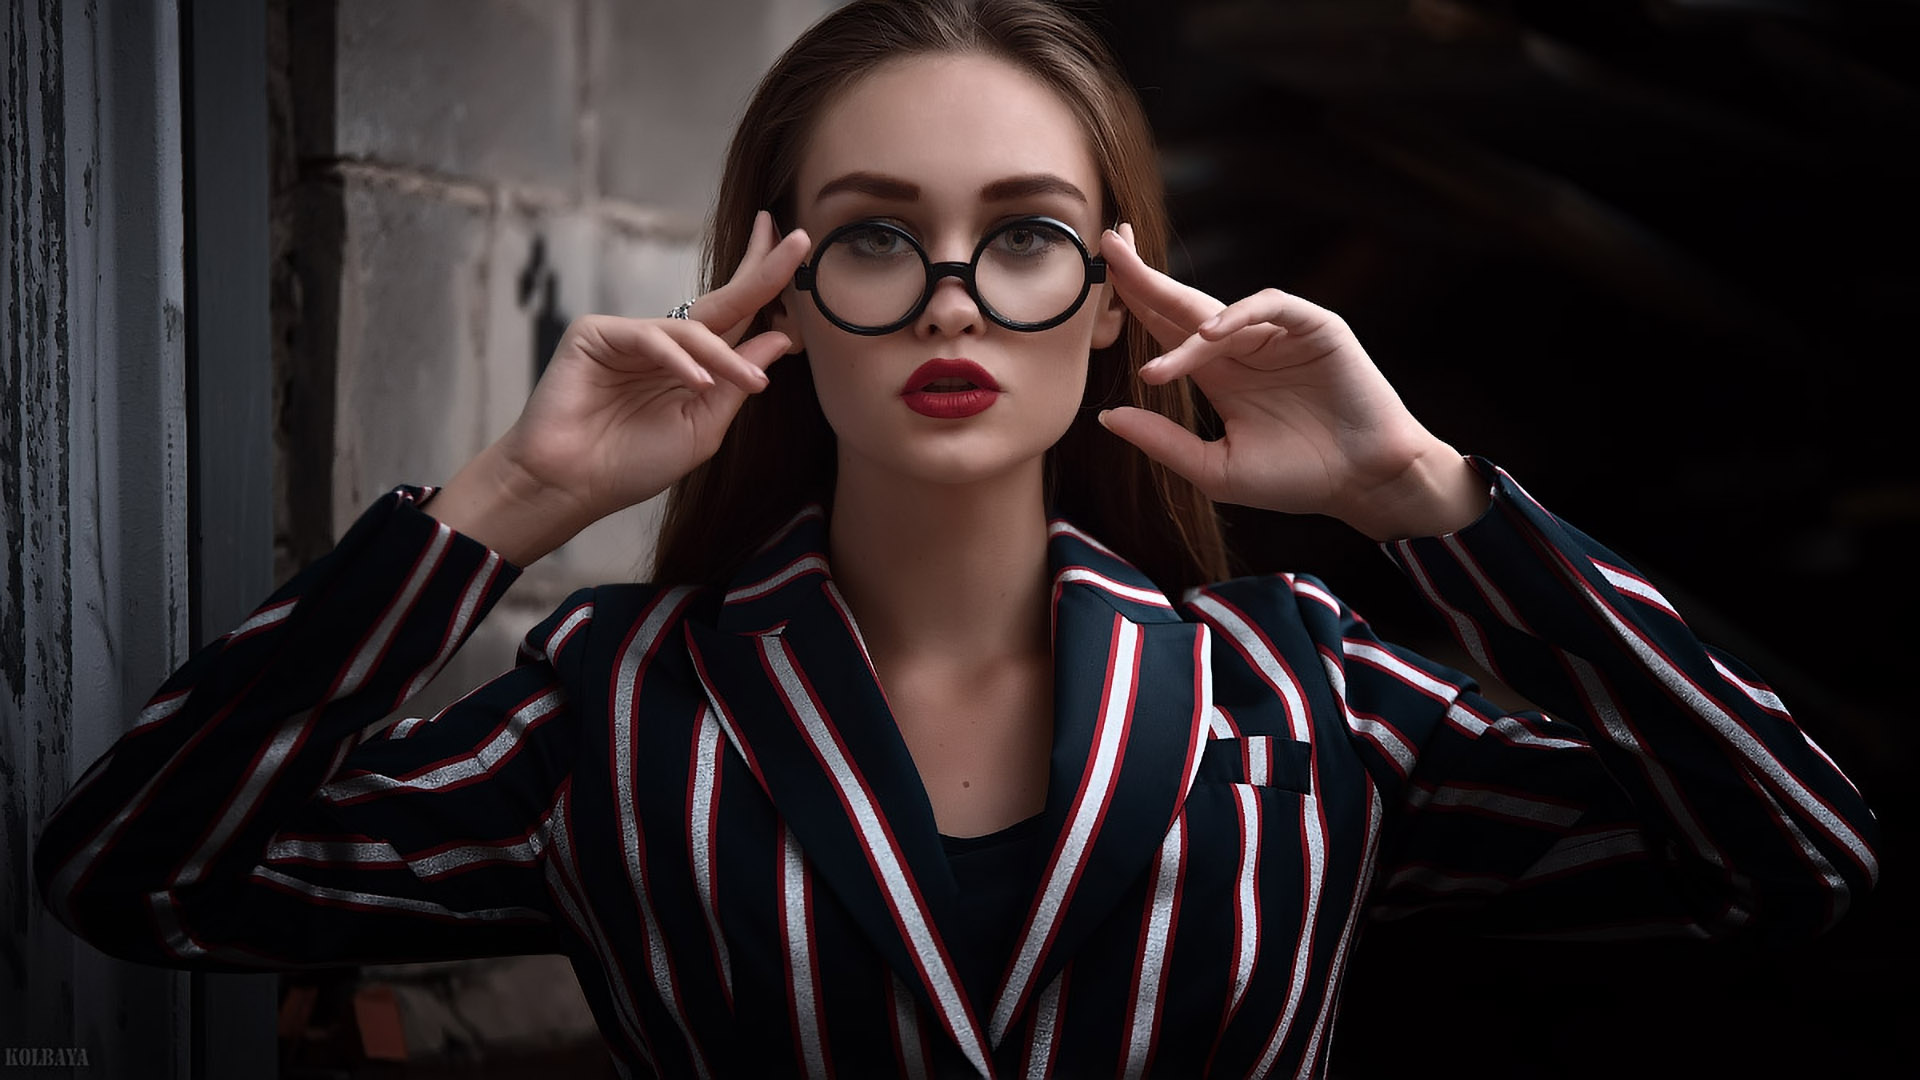 Women Portrait Women With Glasses Red Lipstick Face Touching Glasses 1920x1080